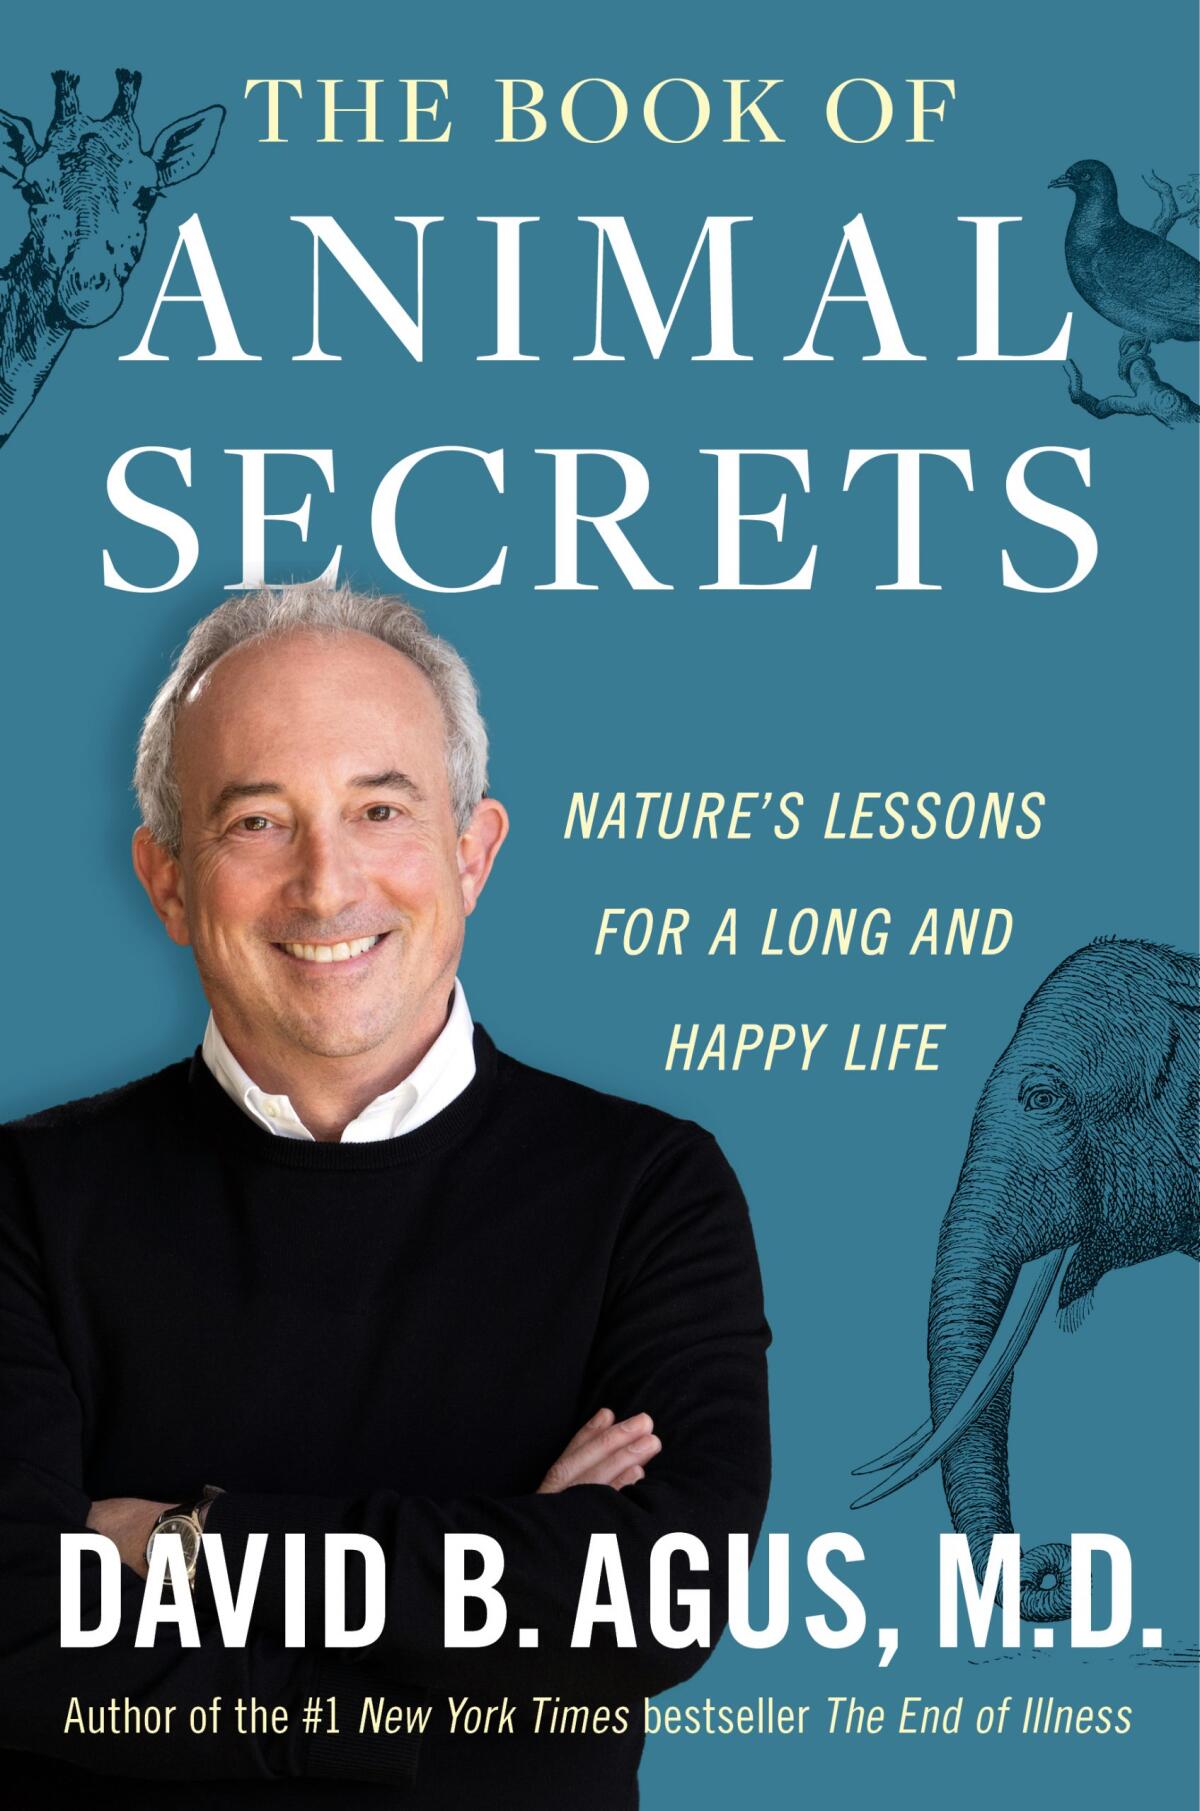 "The Book of Animal Secrets: Nature's Lessons for a Long and Happy Life" by Dr. David B. Agus